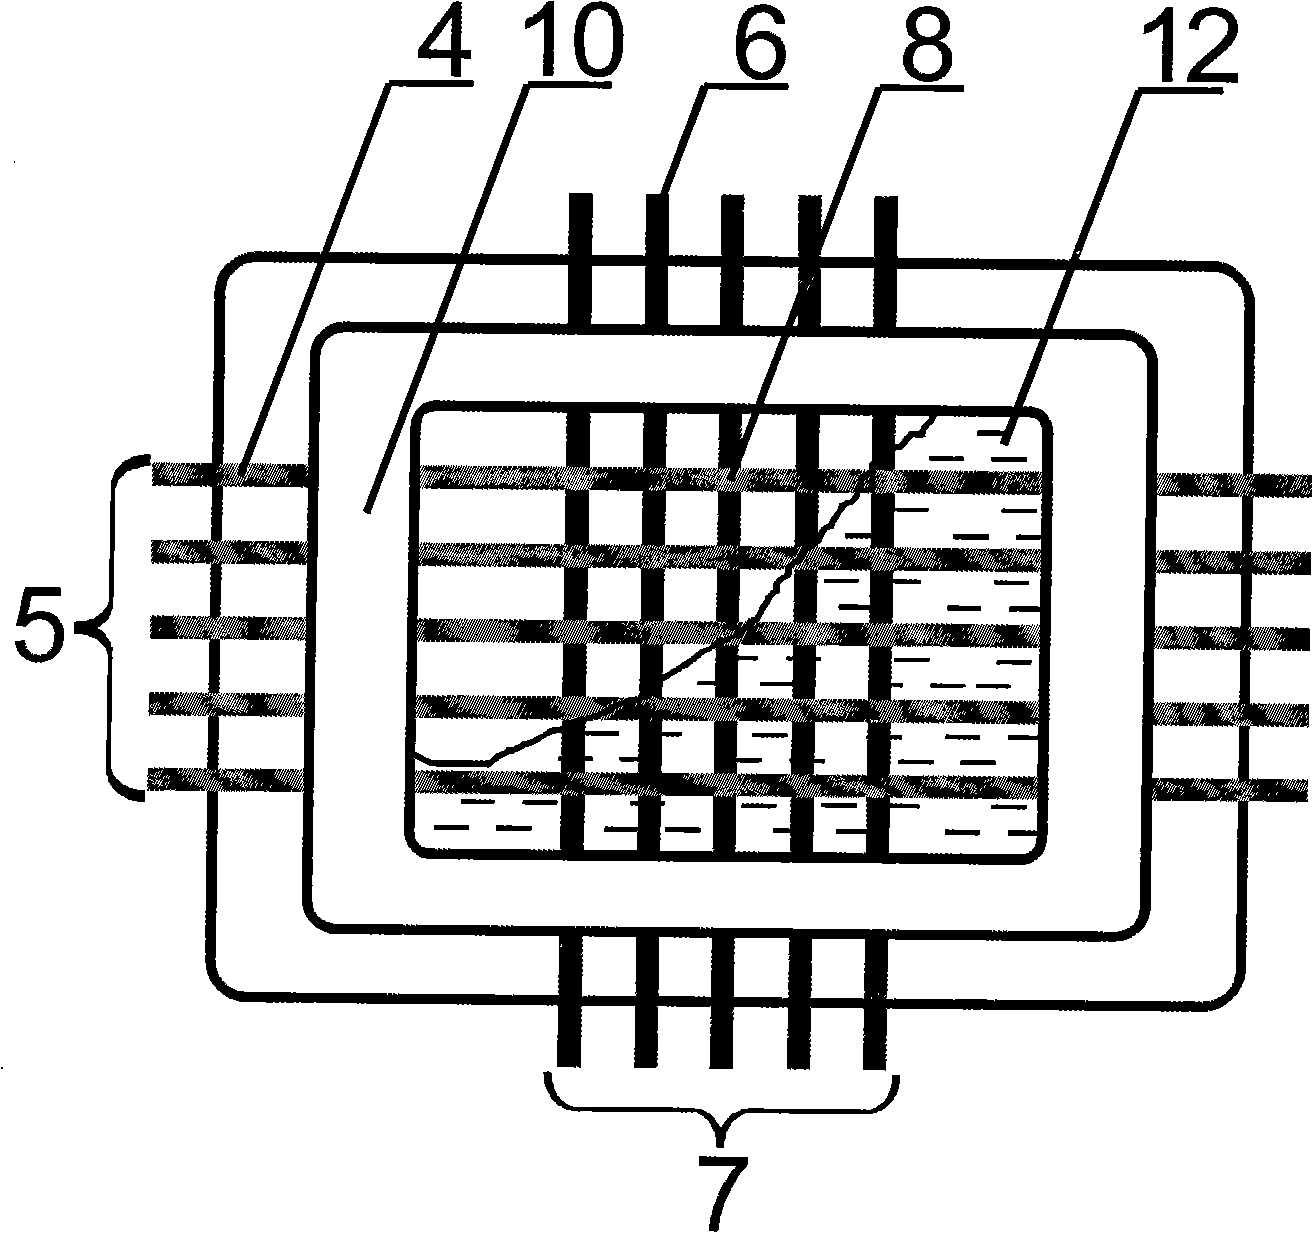 Construction method of micro point array in microchannel